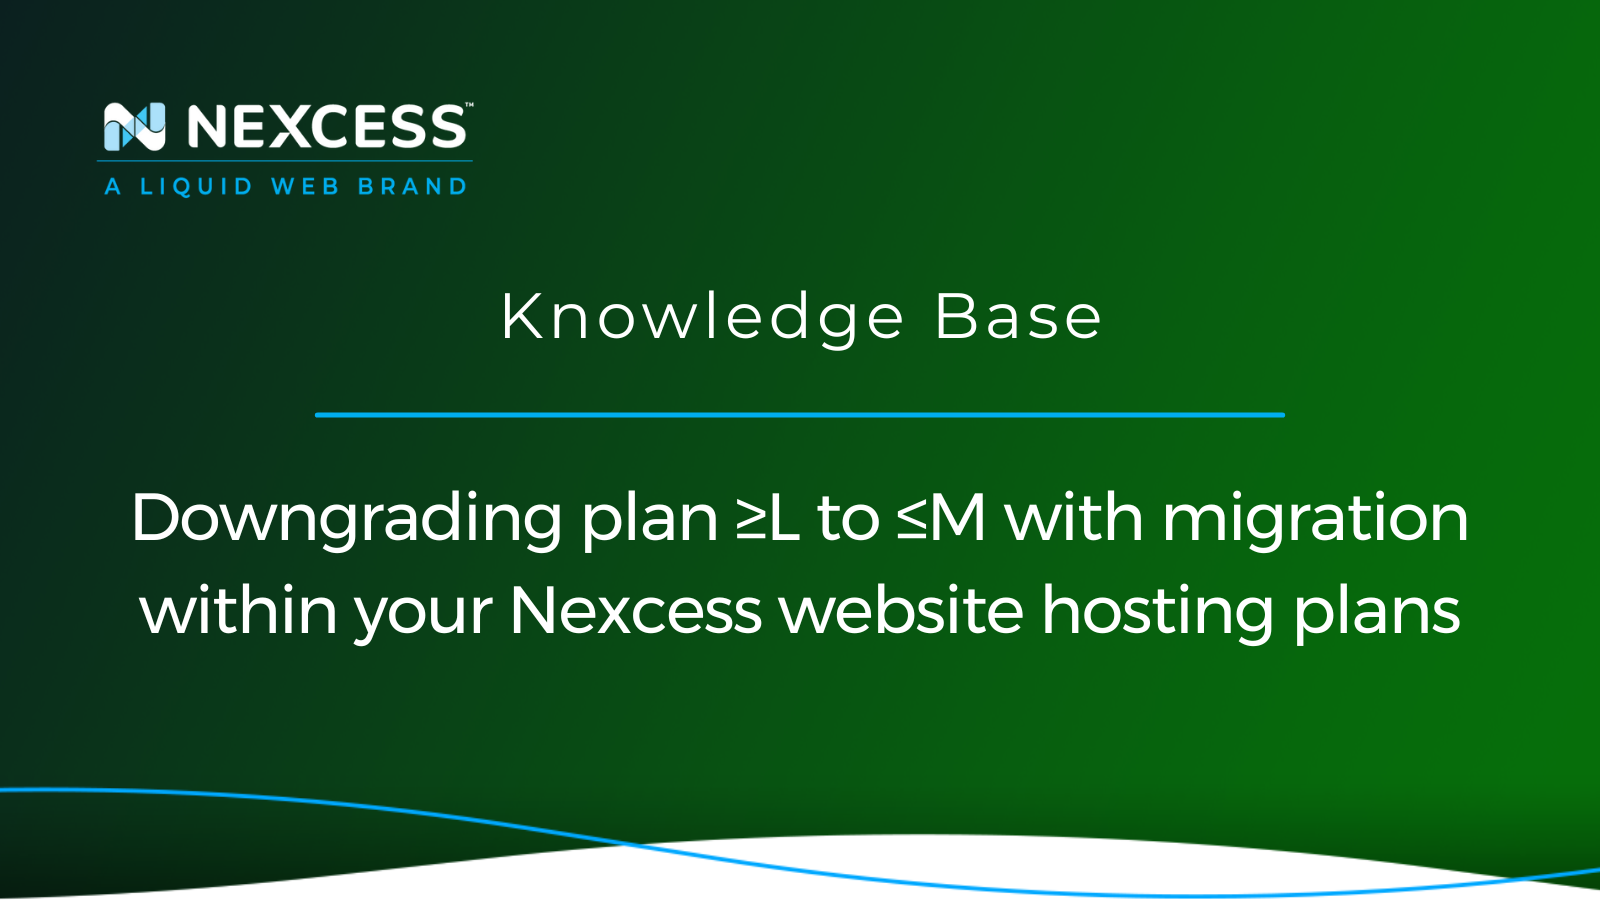 Downgrading plan ≥L to ≤M with migration within your Nexcess website hosting plans